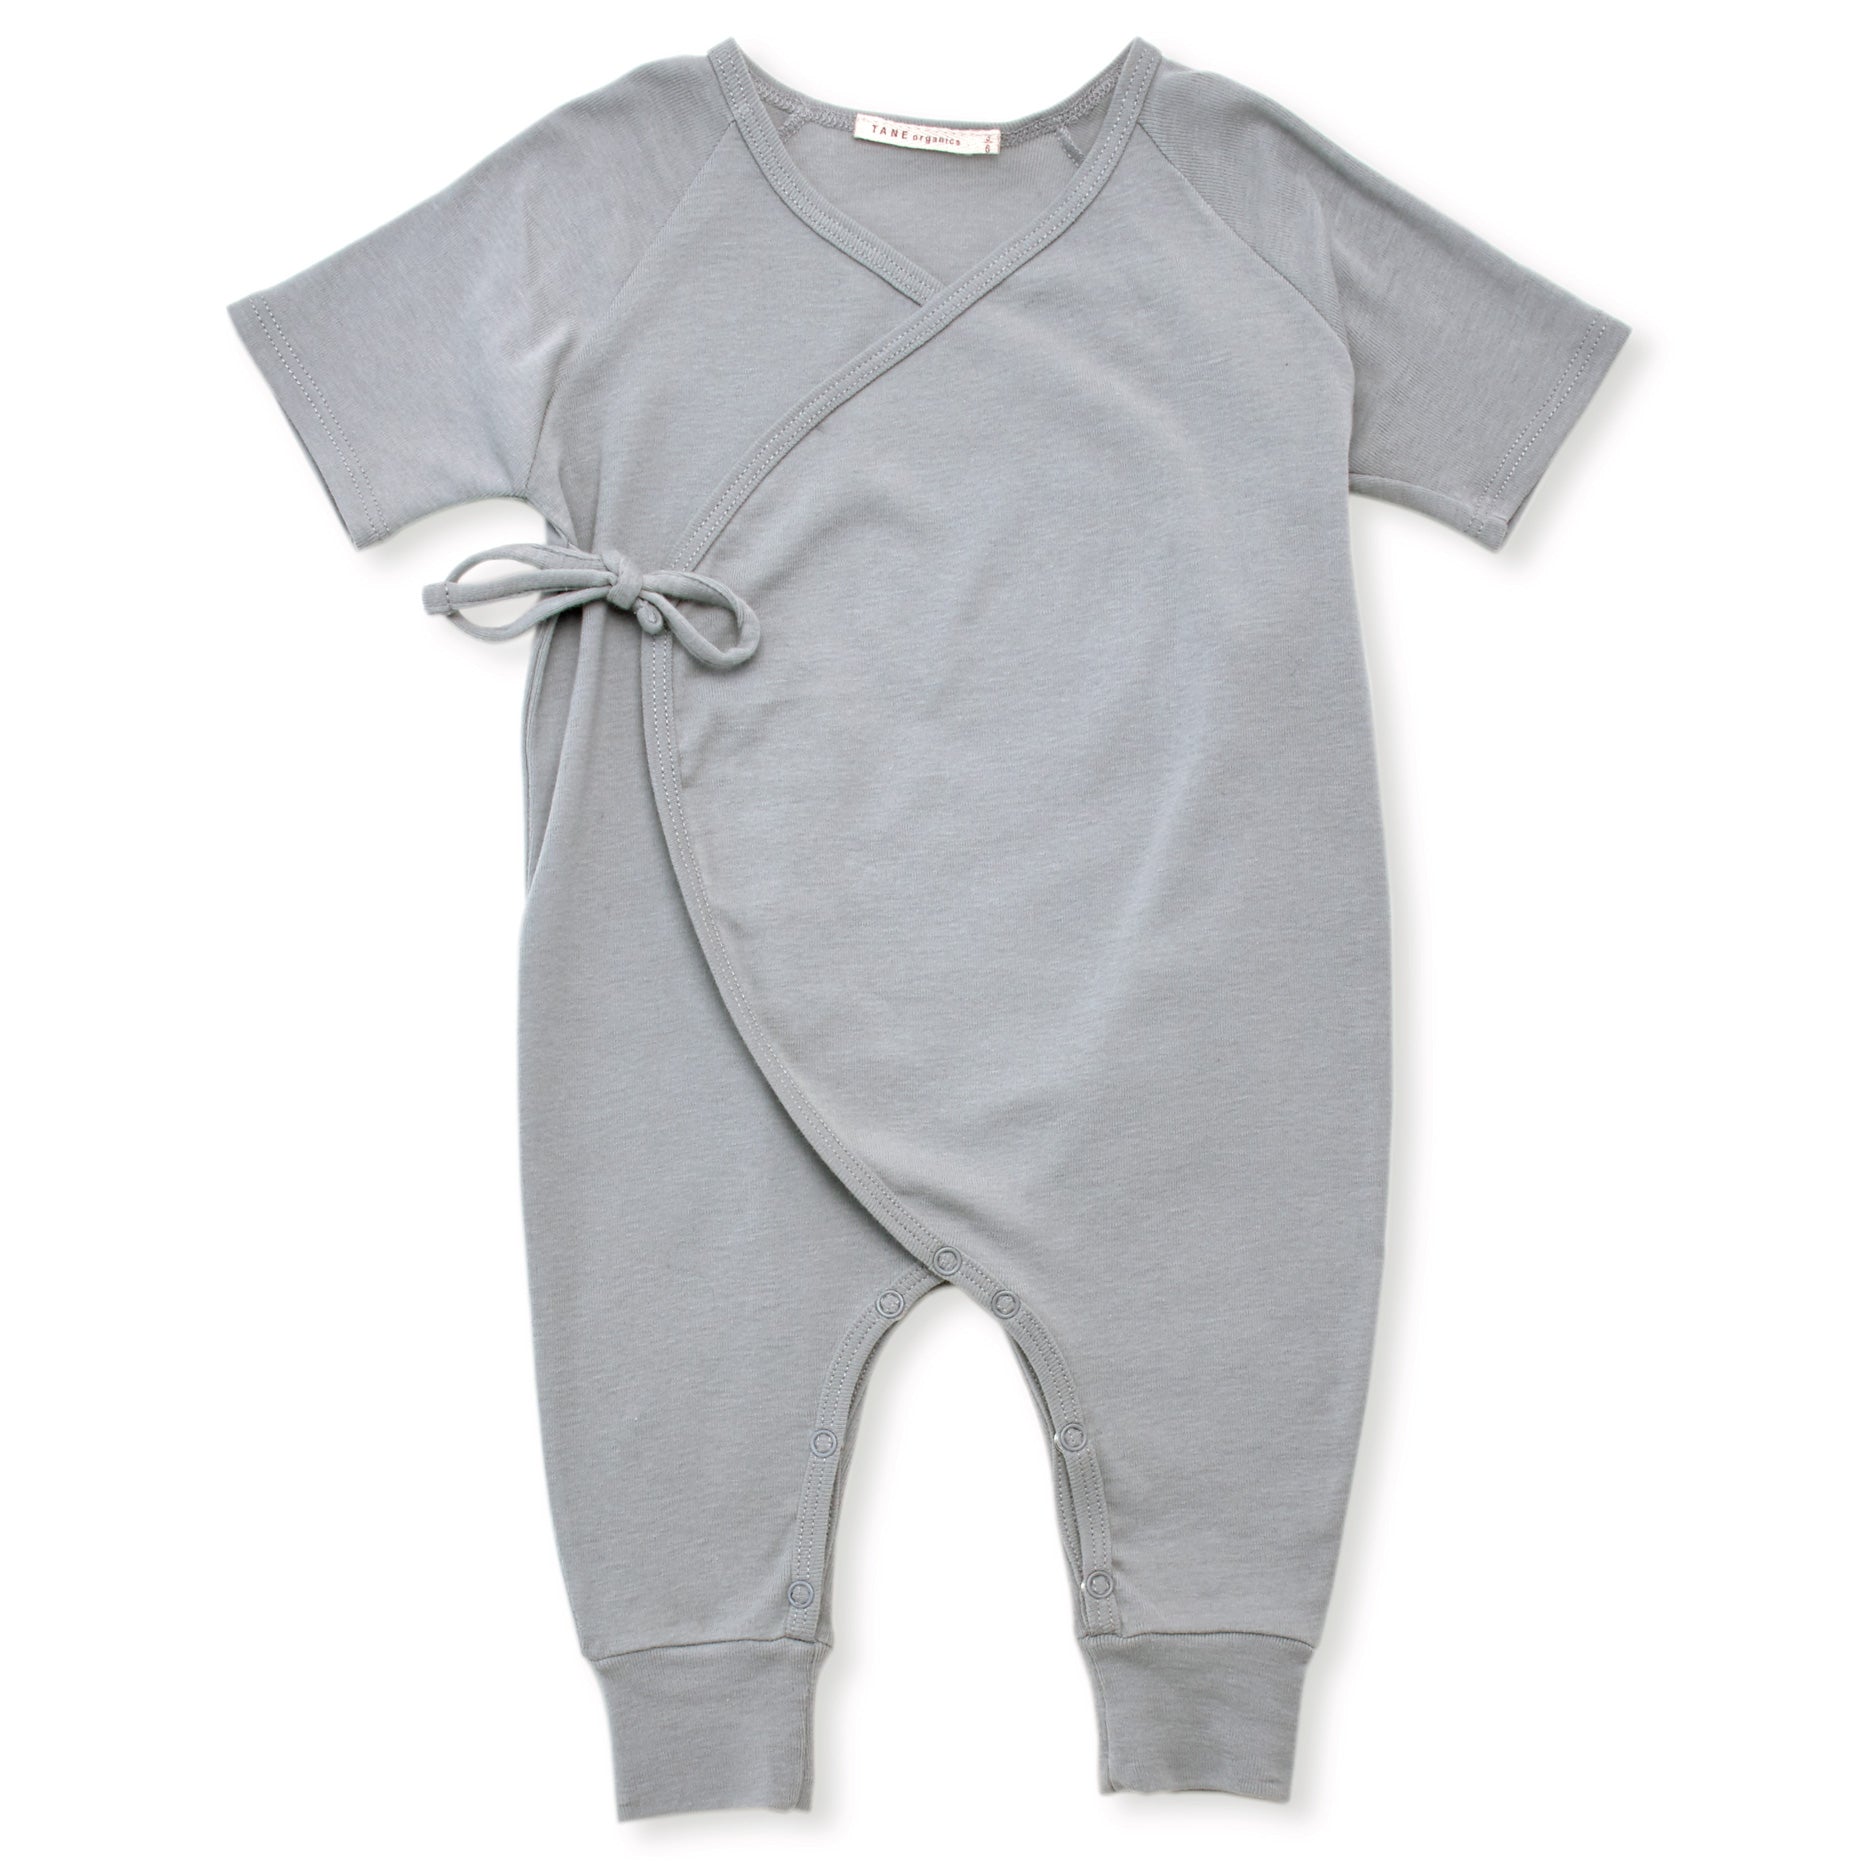 cool grey short sleeved kimono double front ties wrapped coverall..  100% organic pima cotton ribbed knit.